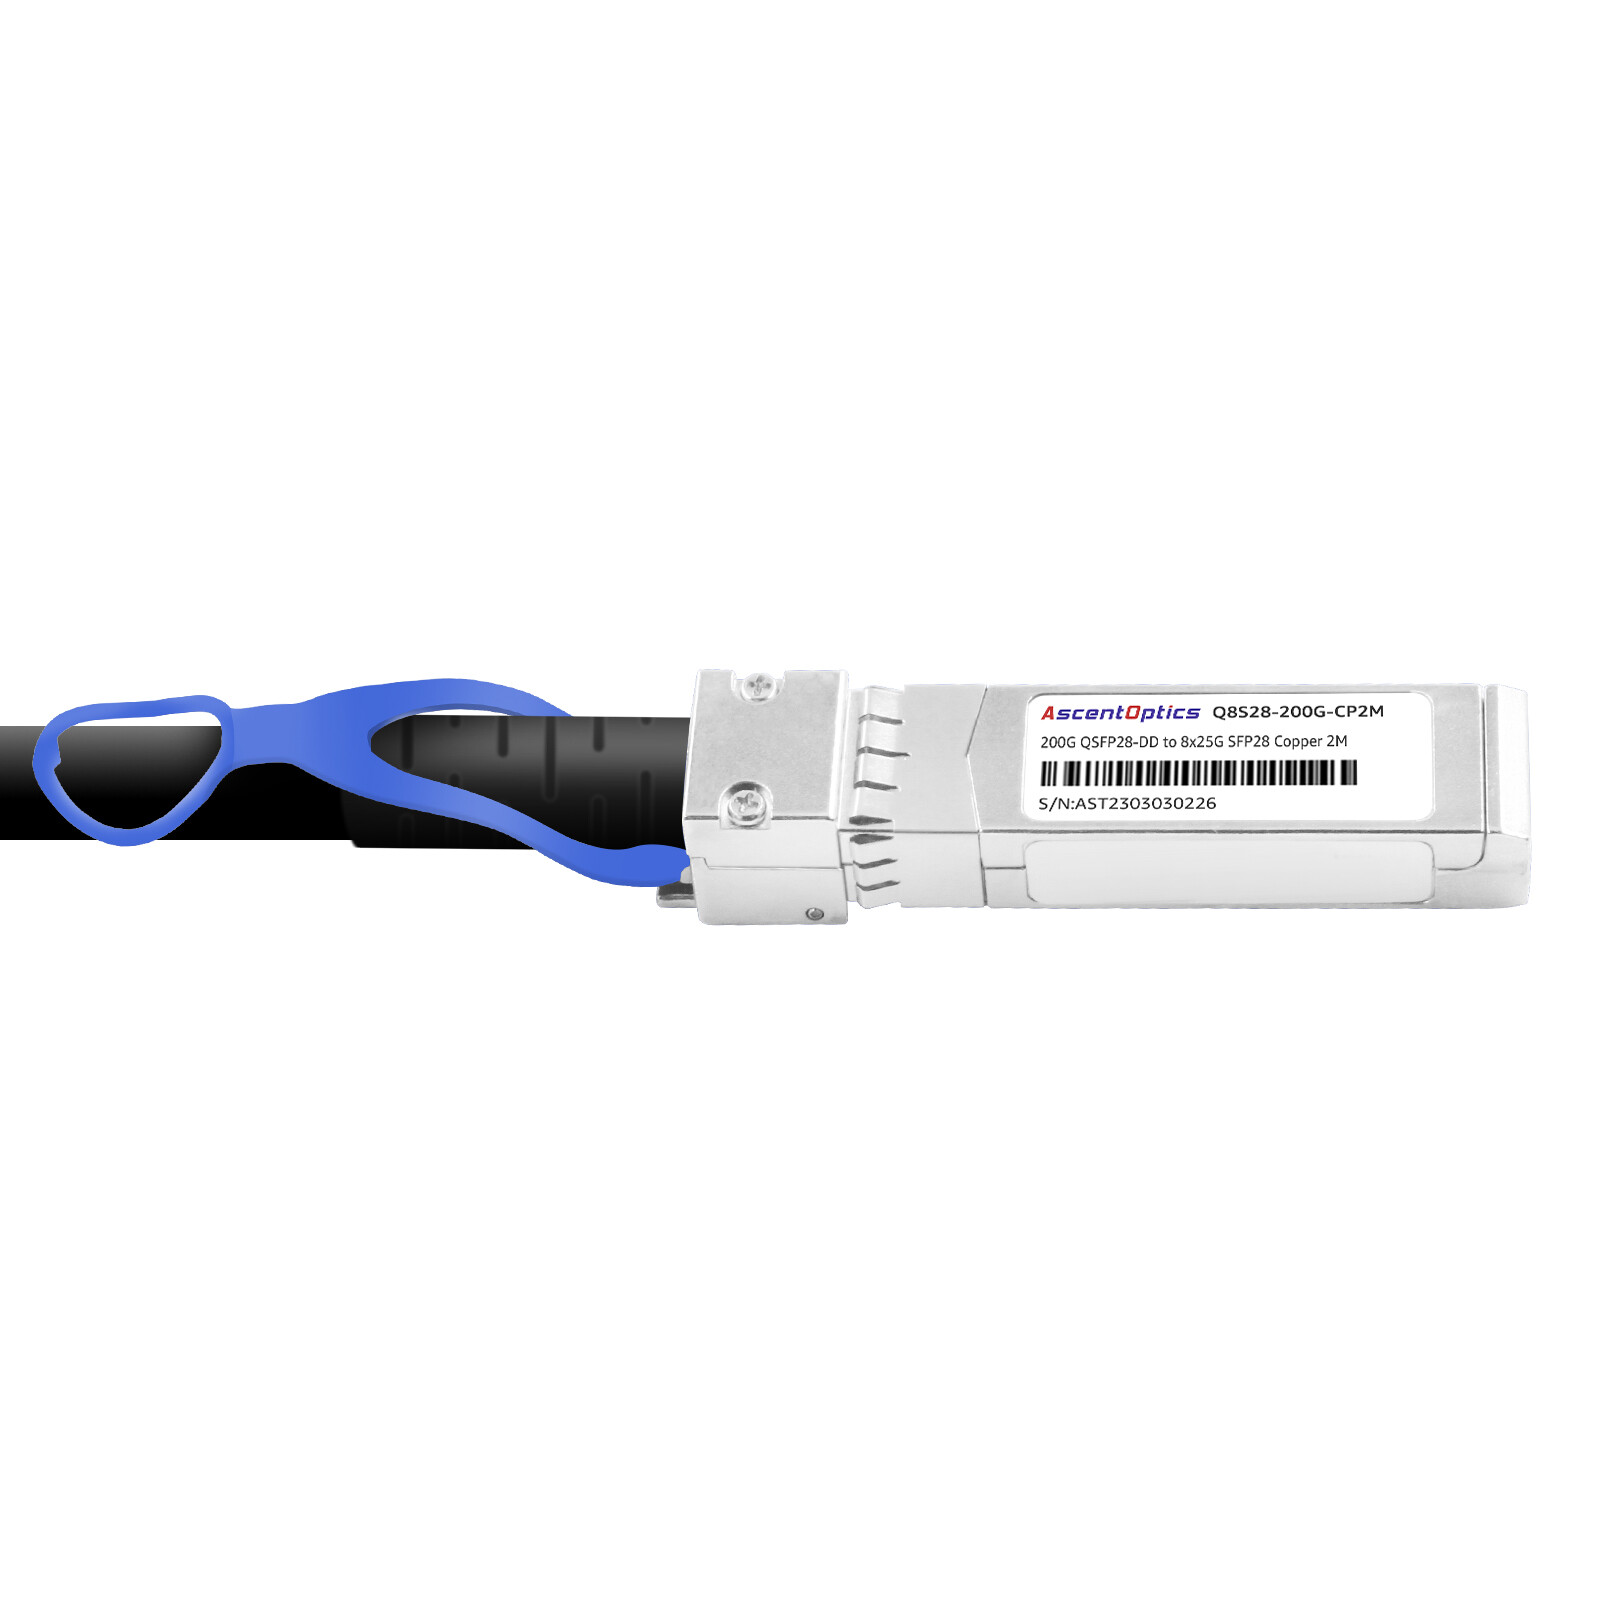 200G QSFP28-DD to 8x 25G SFP28 Copper Breakout Cable,2 Meters,Passive